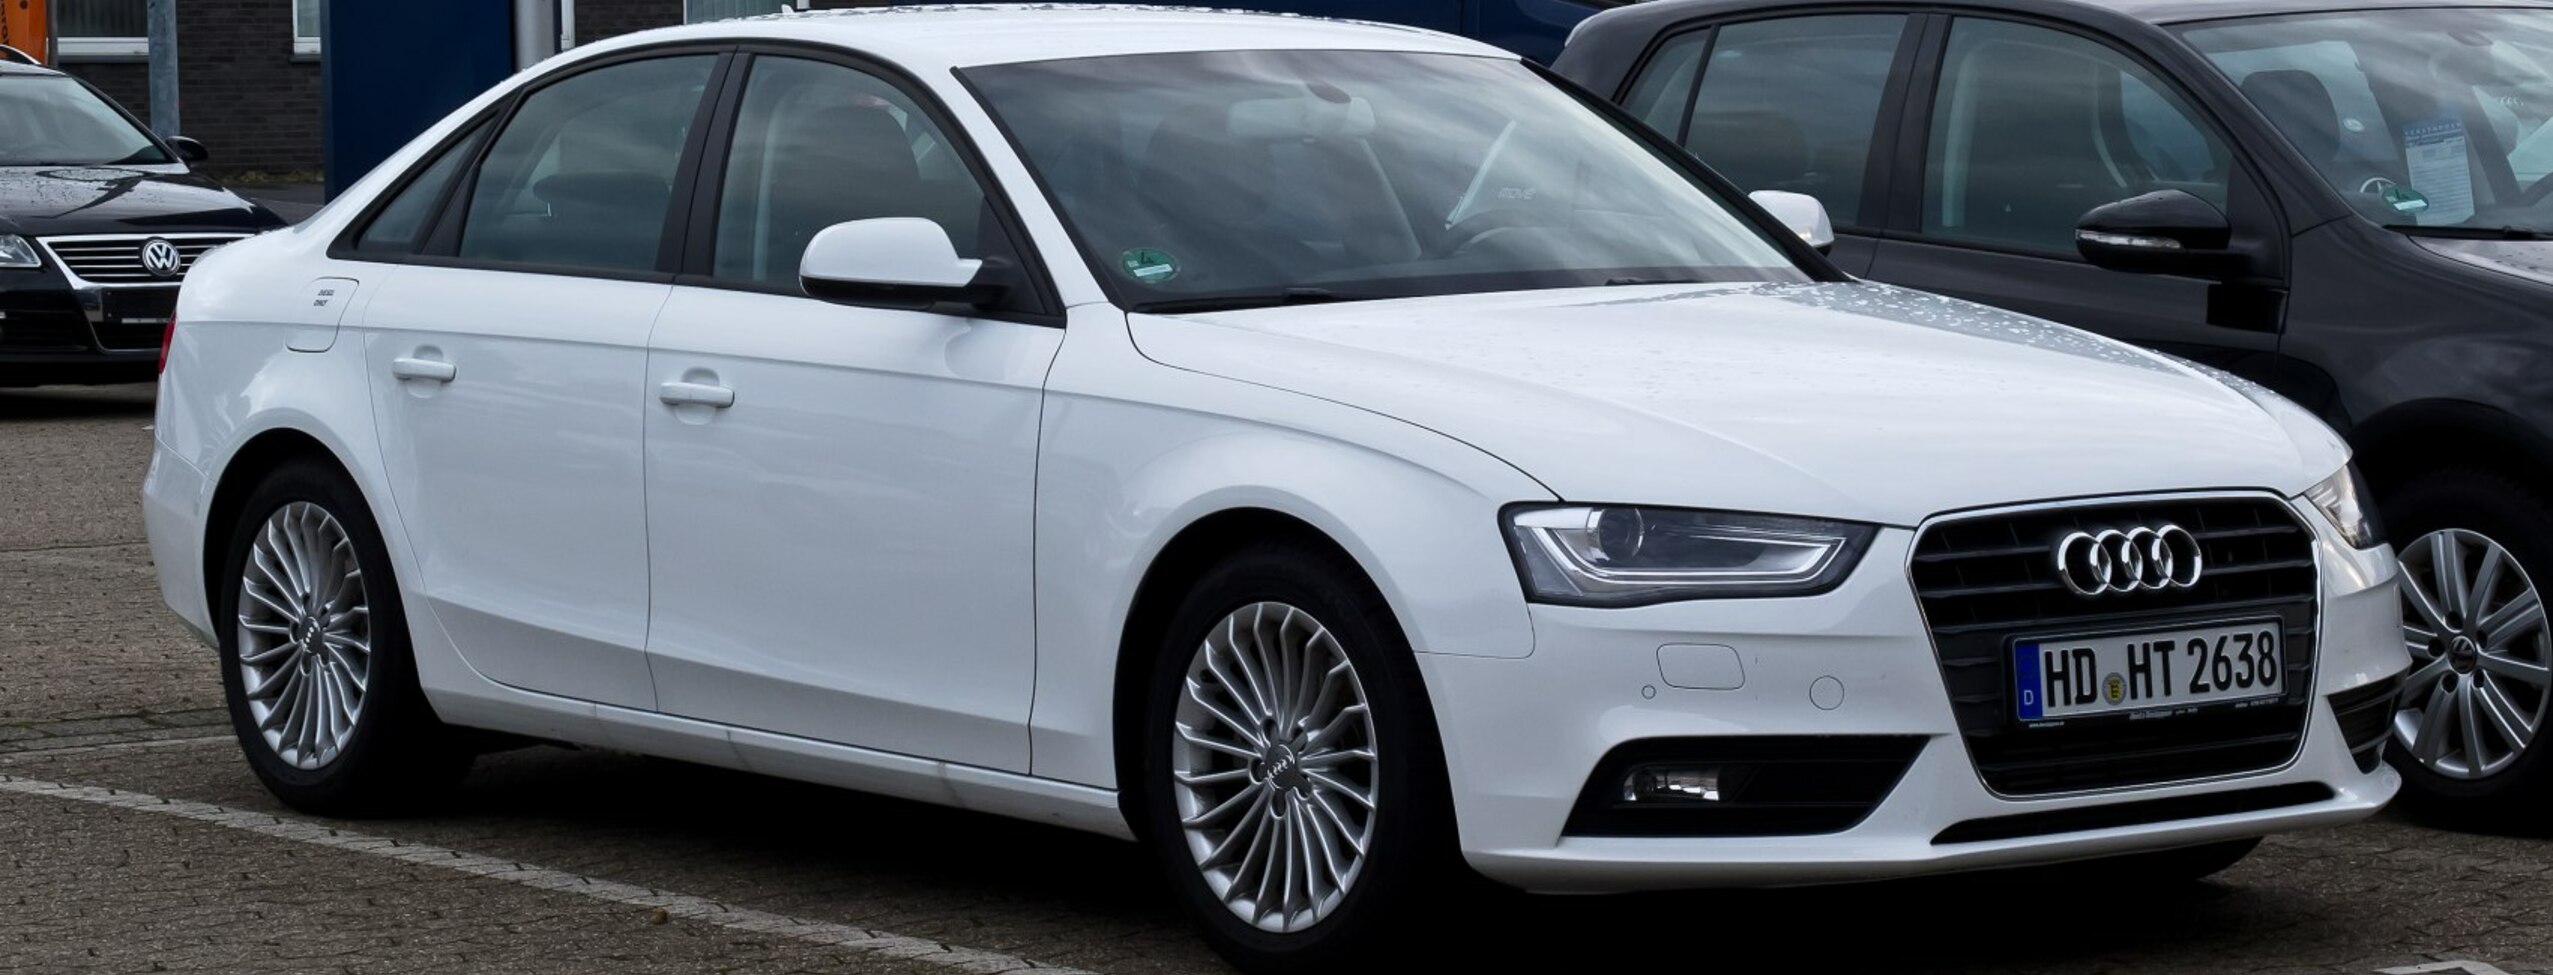 Audi A4 (B8 8K, facelift 2011) 2.0 TDI ultra (163 Hp) 2014, 2015  specifications, prices & reviews